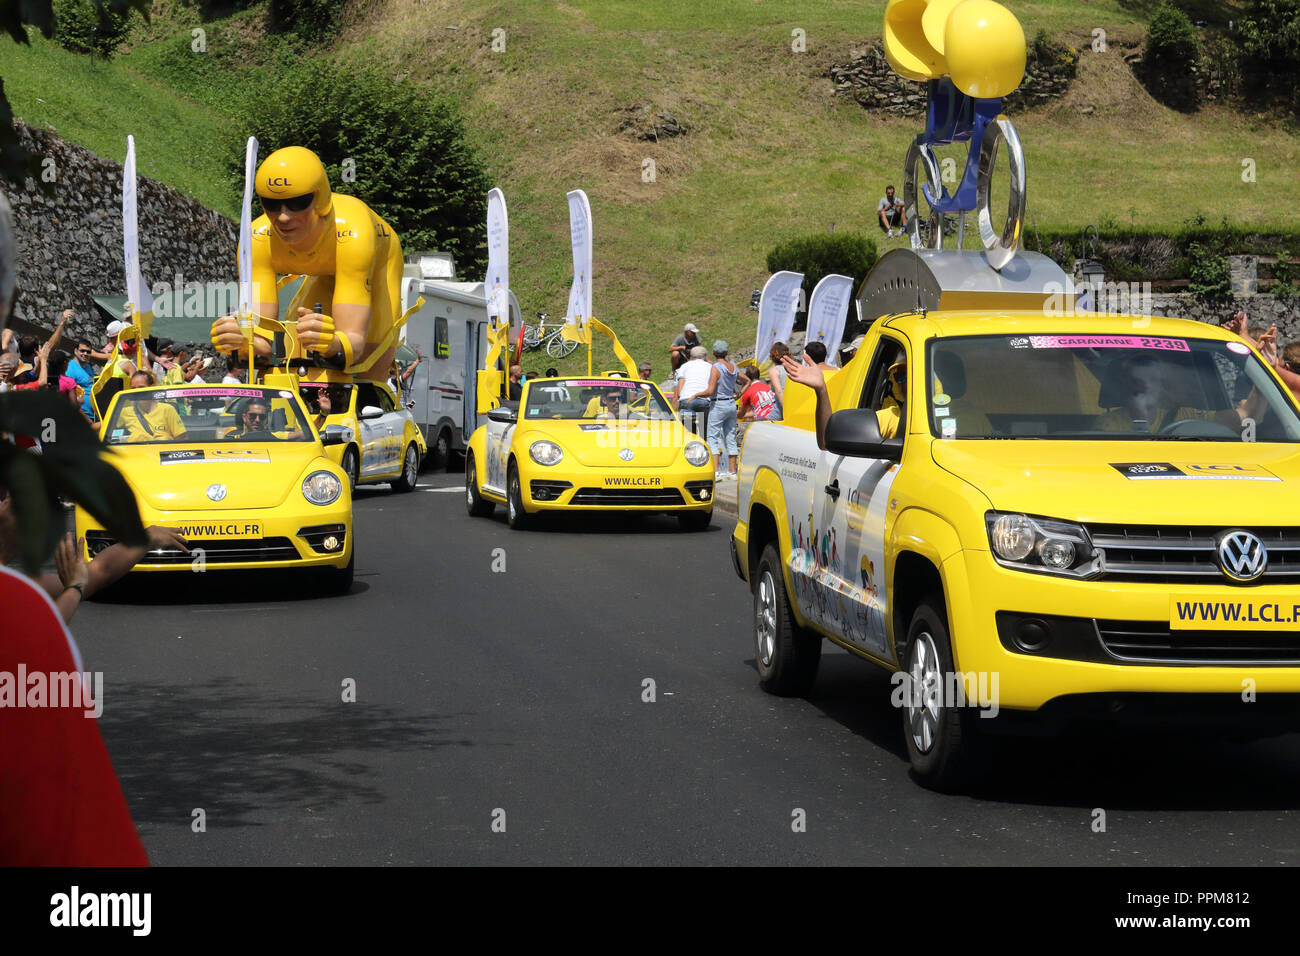 The yellow Le Crédit Lyonnais cars throwing free gifts during the 2018 Tour de France 17th stage in Soulan, French Pyrennìees, ans supporters. Stock Photo